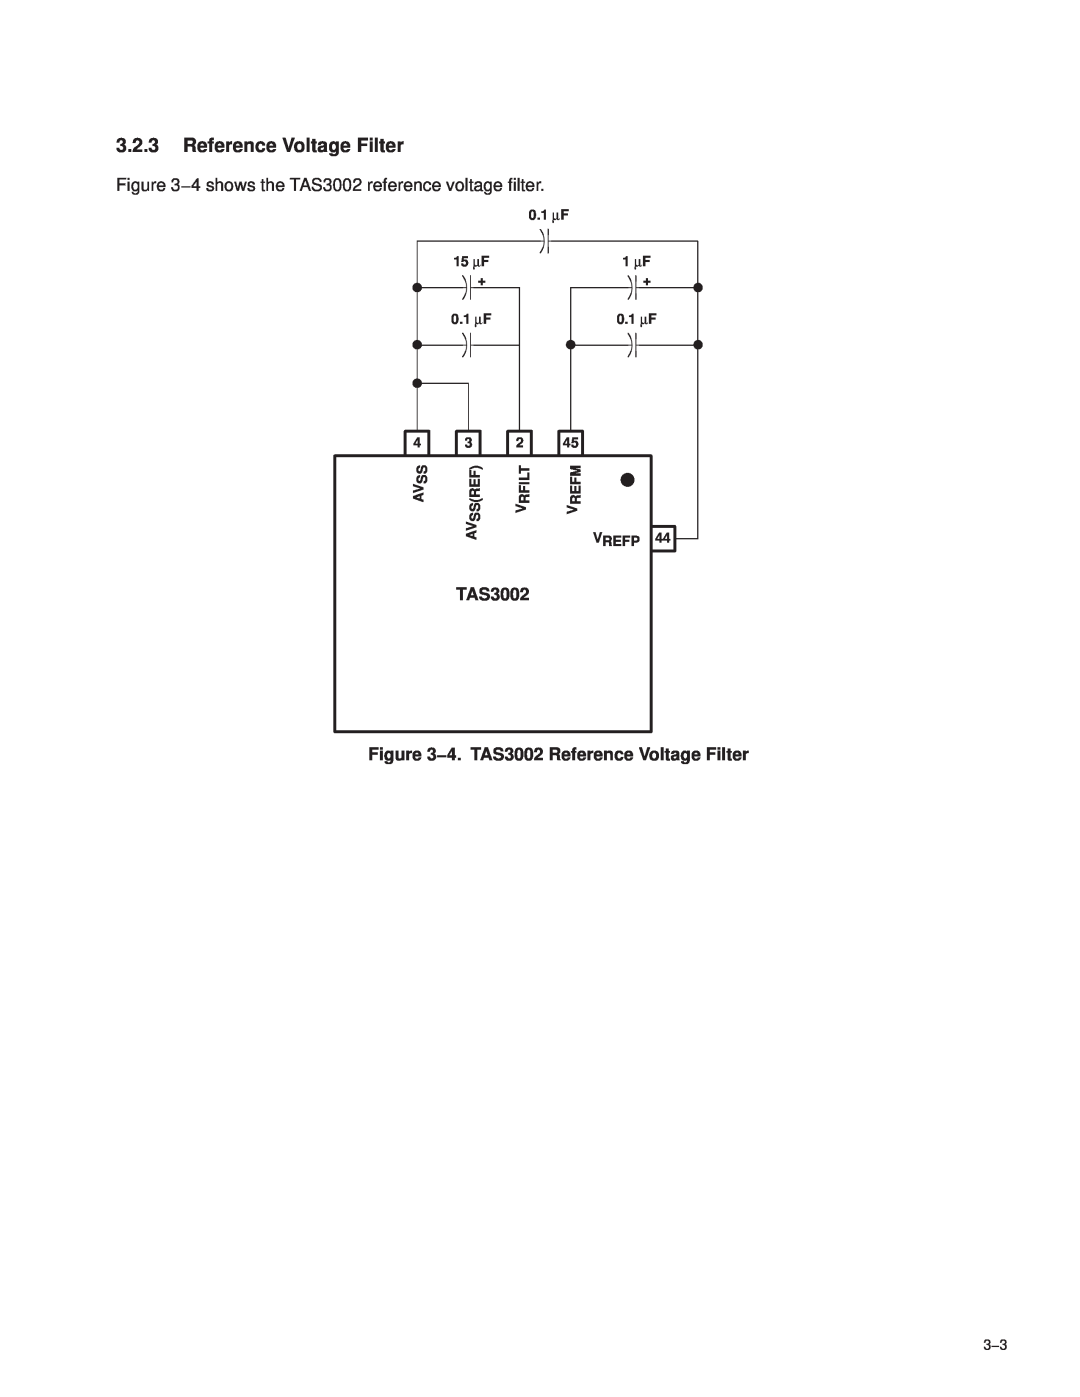 Texas Instruments manual 3.2.3Reference Voltage Filter, 4. TAS3002 Reference Voltage Filter 